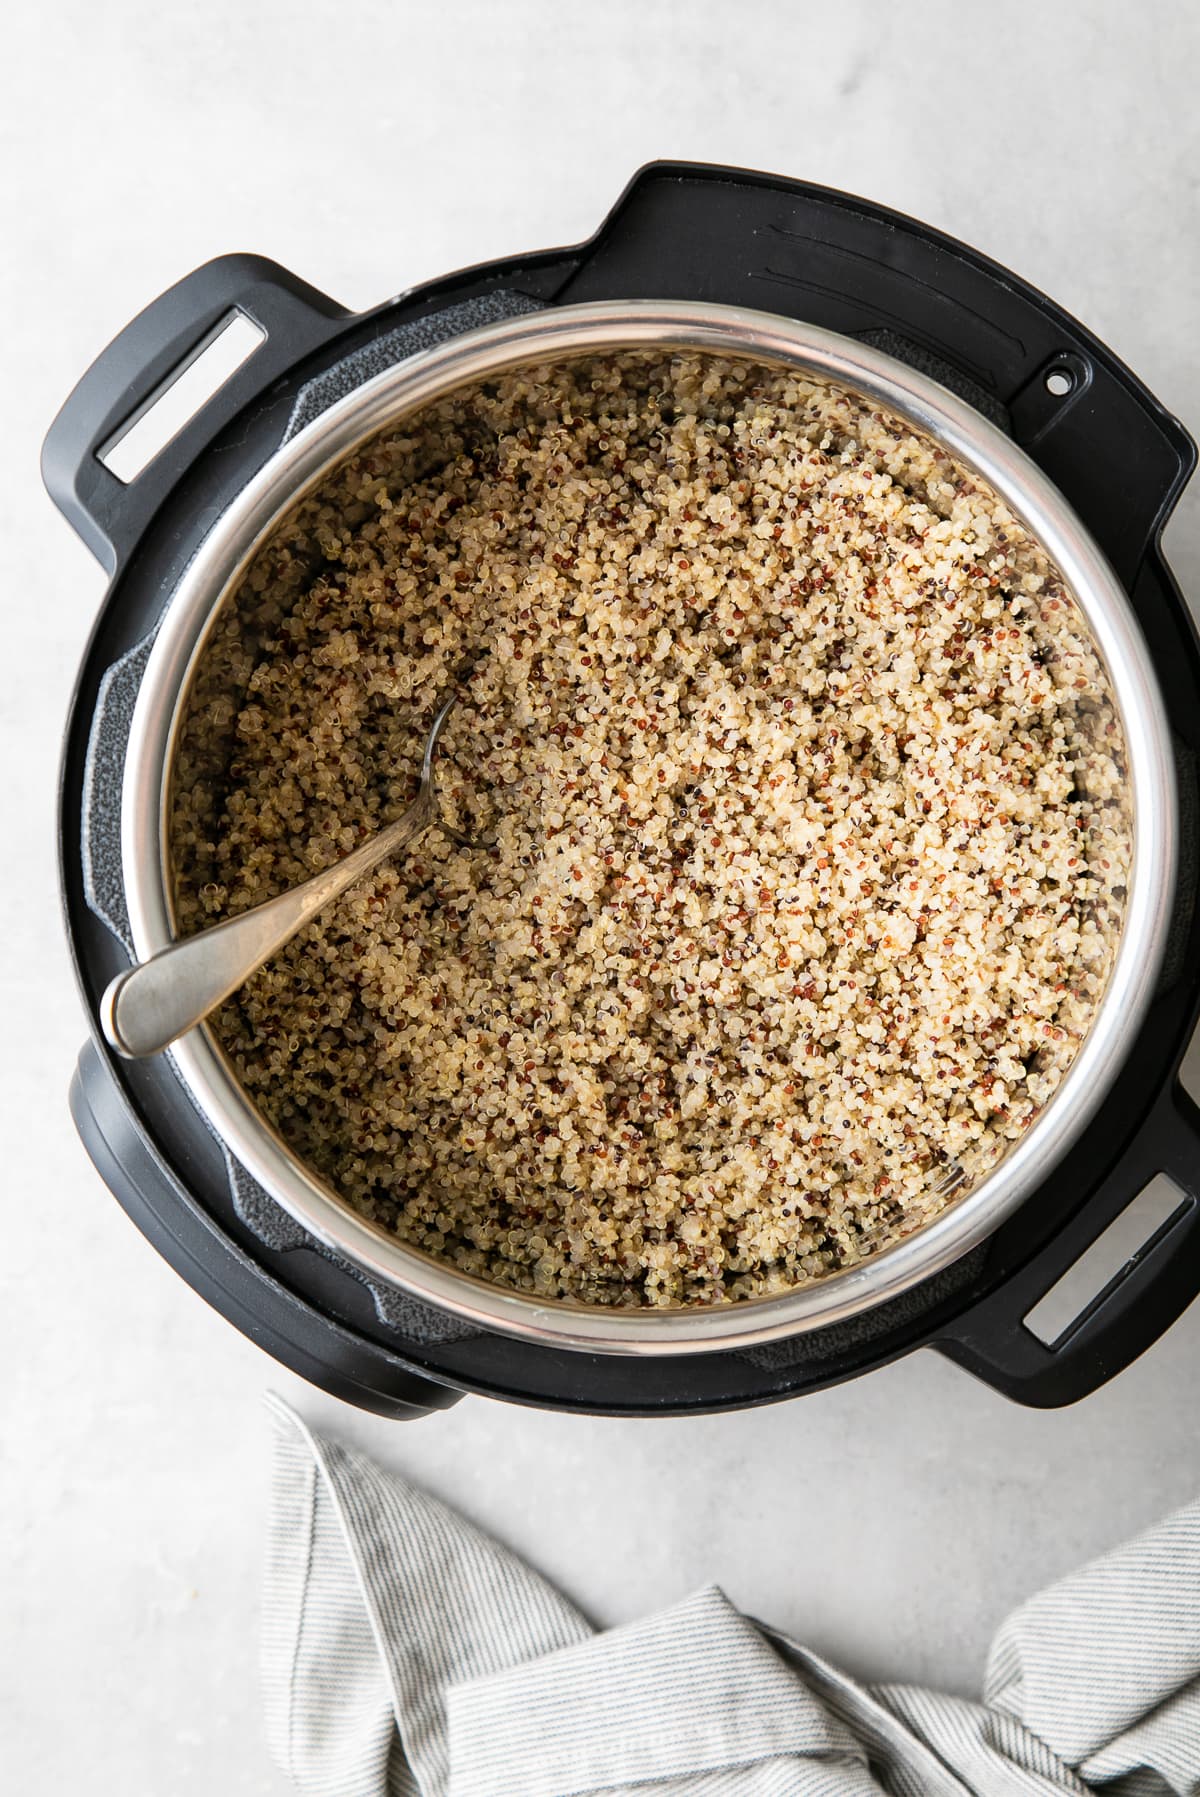 Top view of freshly made quinoa in an instant pot.